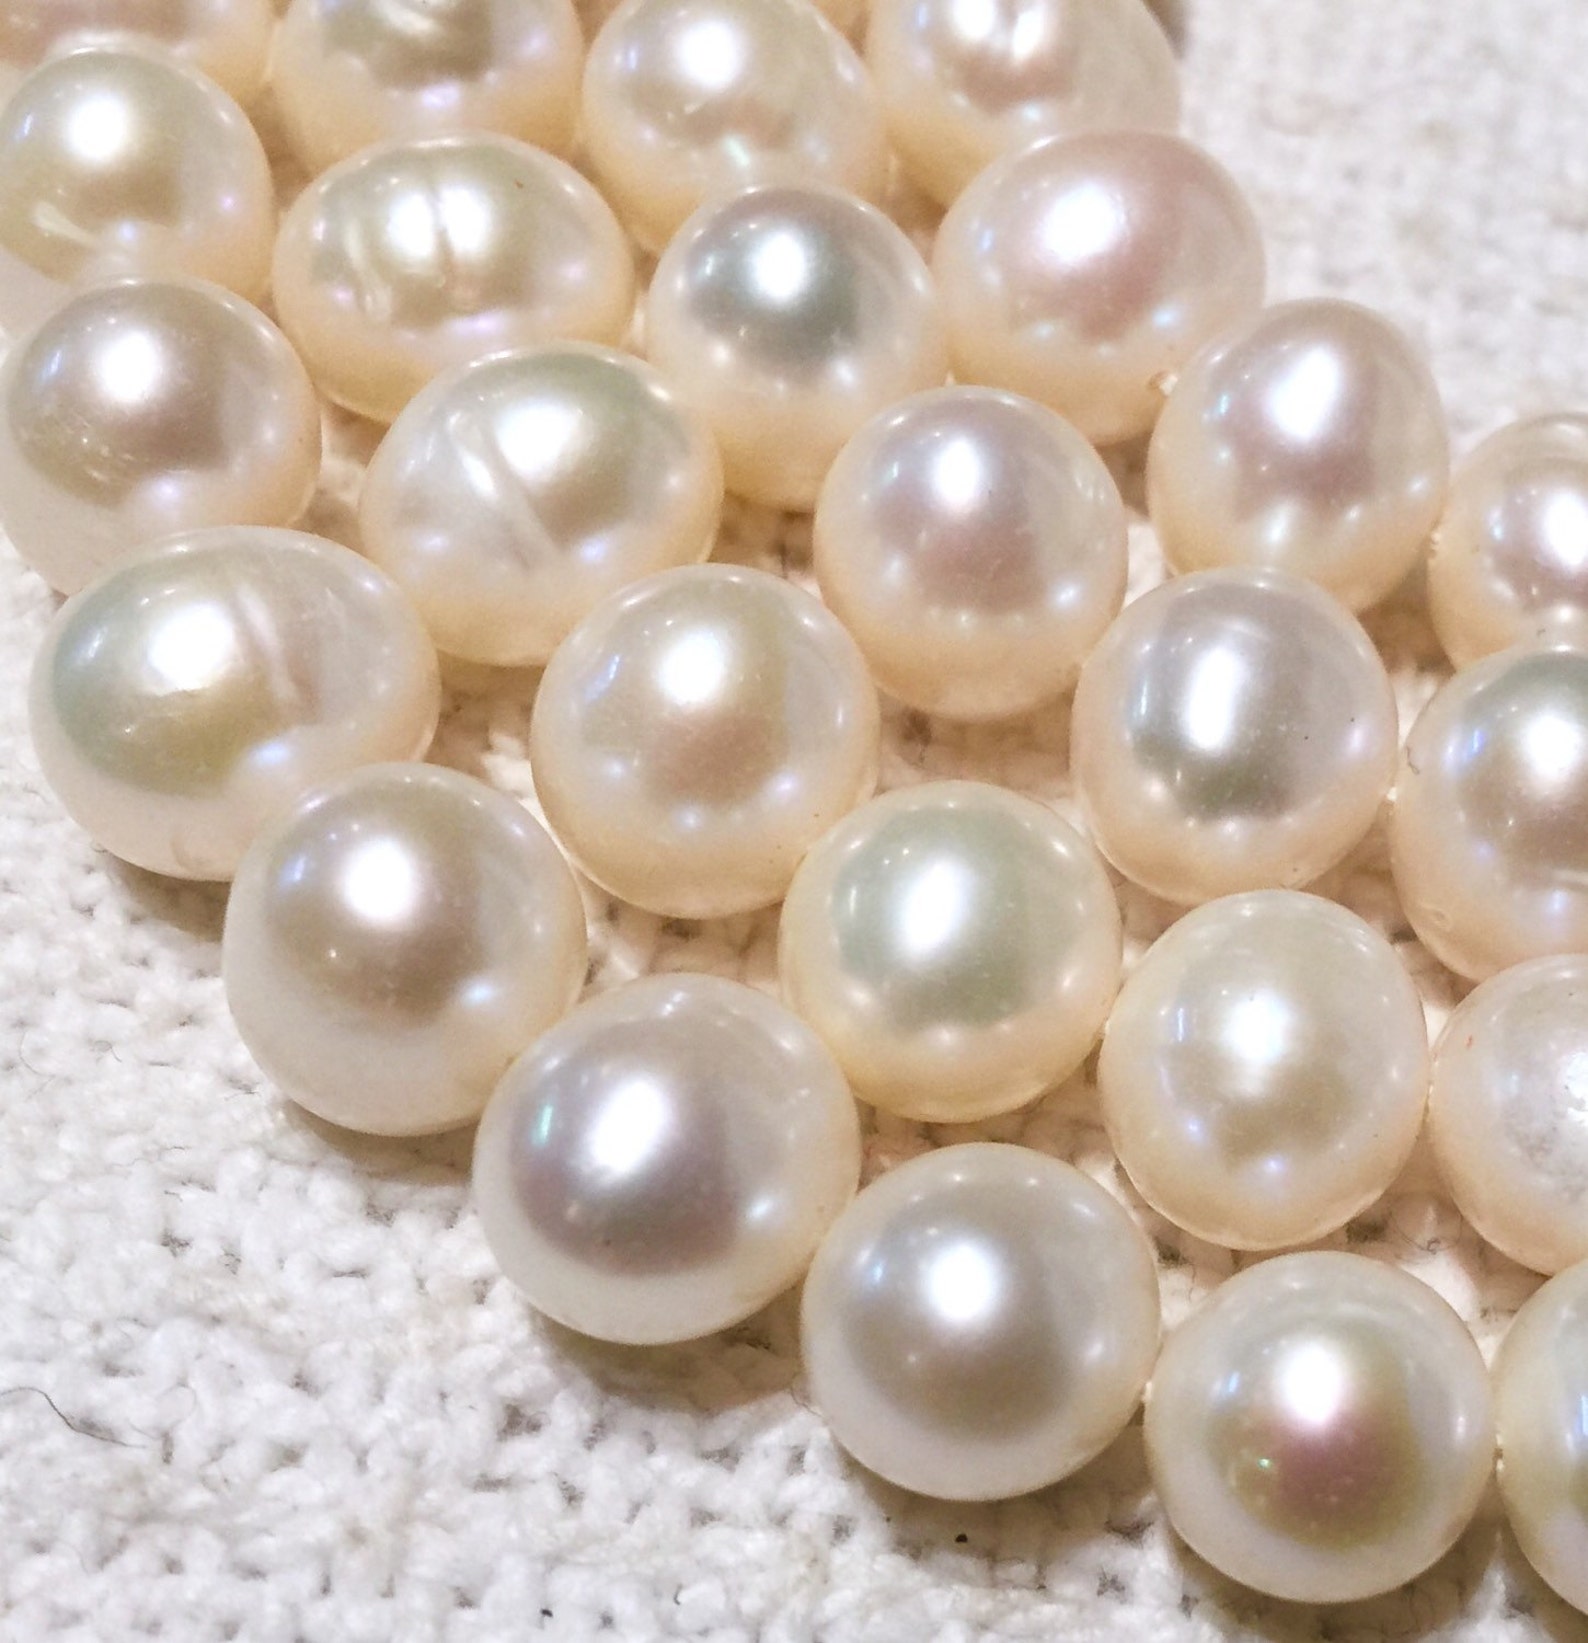 Big Round Freshwater Pearl 9-10mm round Potato Pearl Natural | Etsy